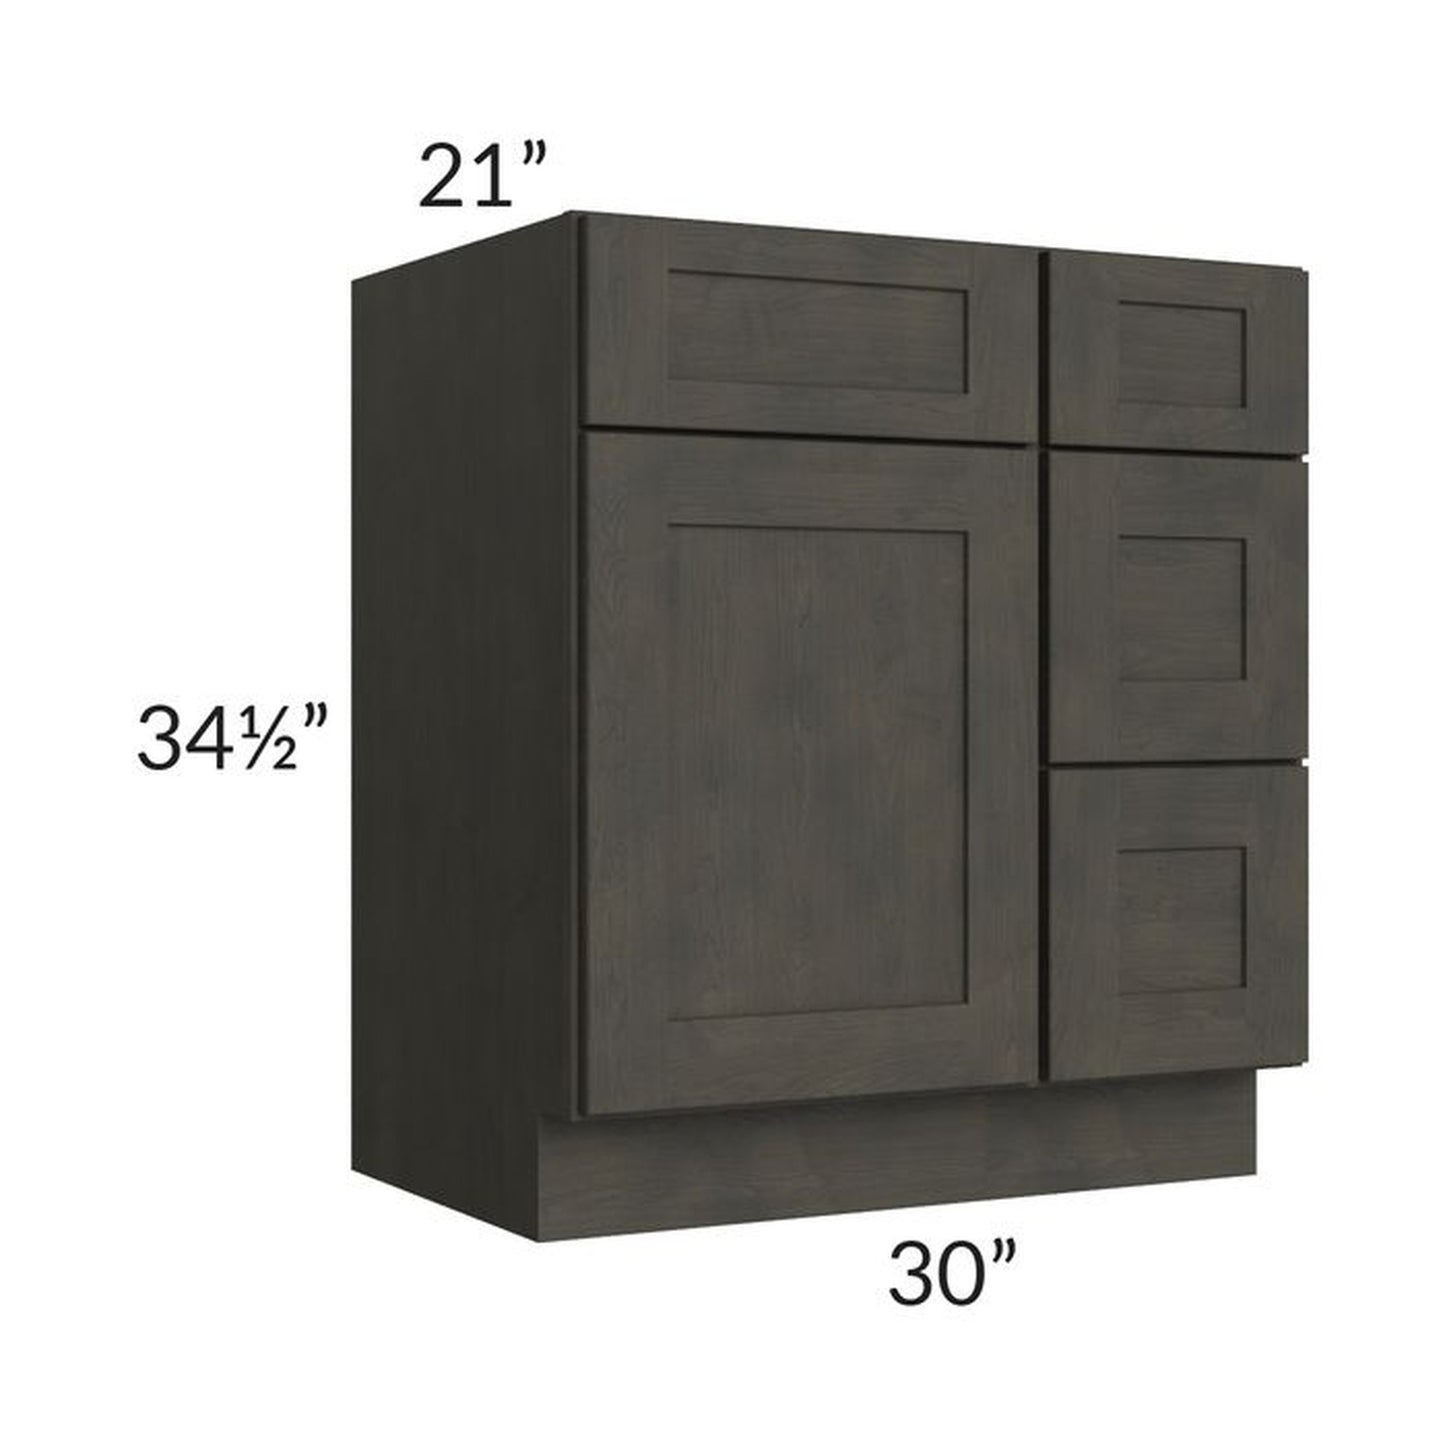 RTA Charcoal Grey Shaker 30" Vanity Base Cabinet (Drawers on Right) with 2 Decorative End Panels